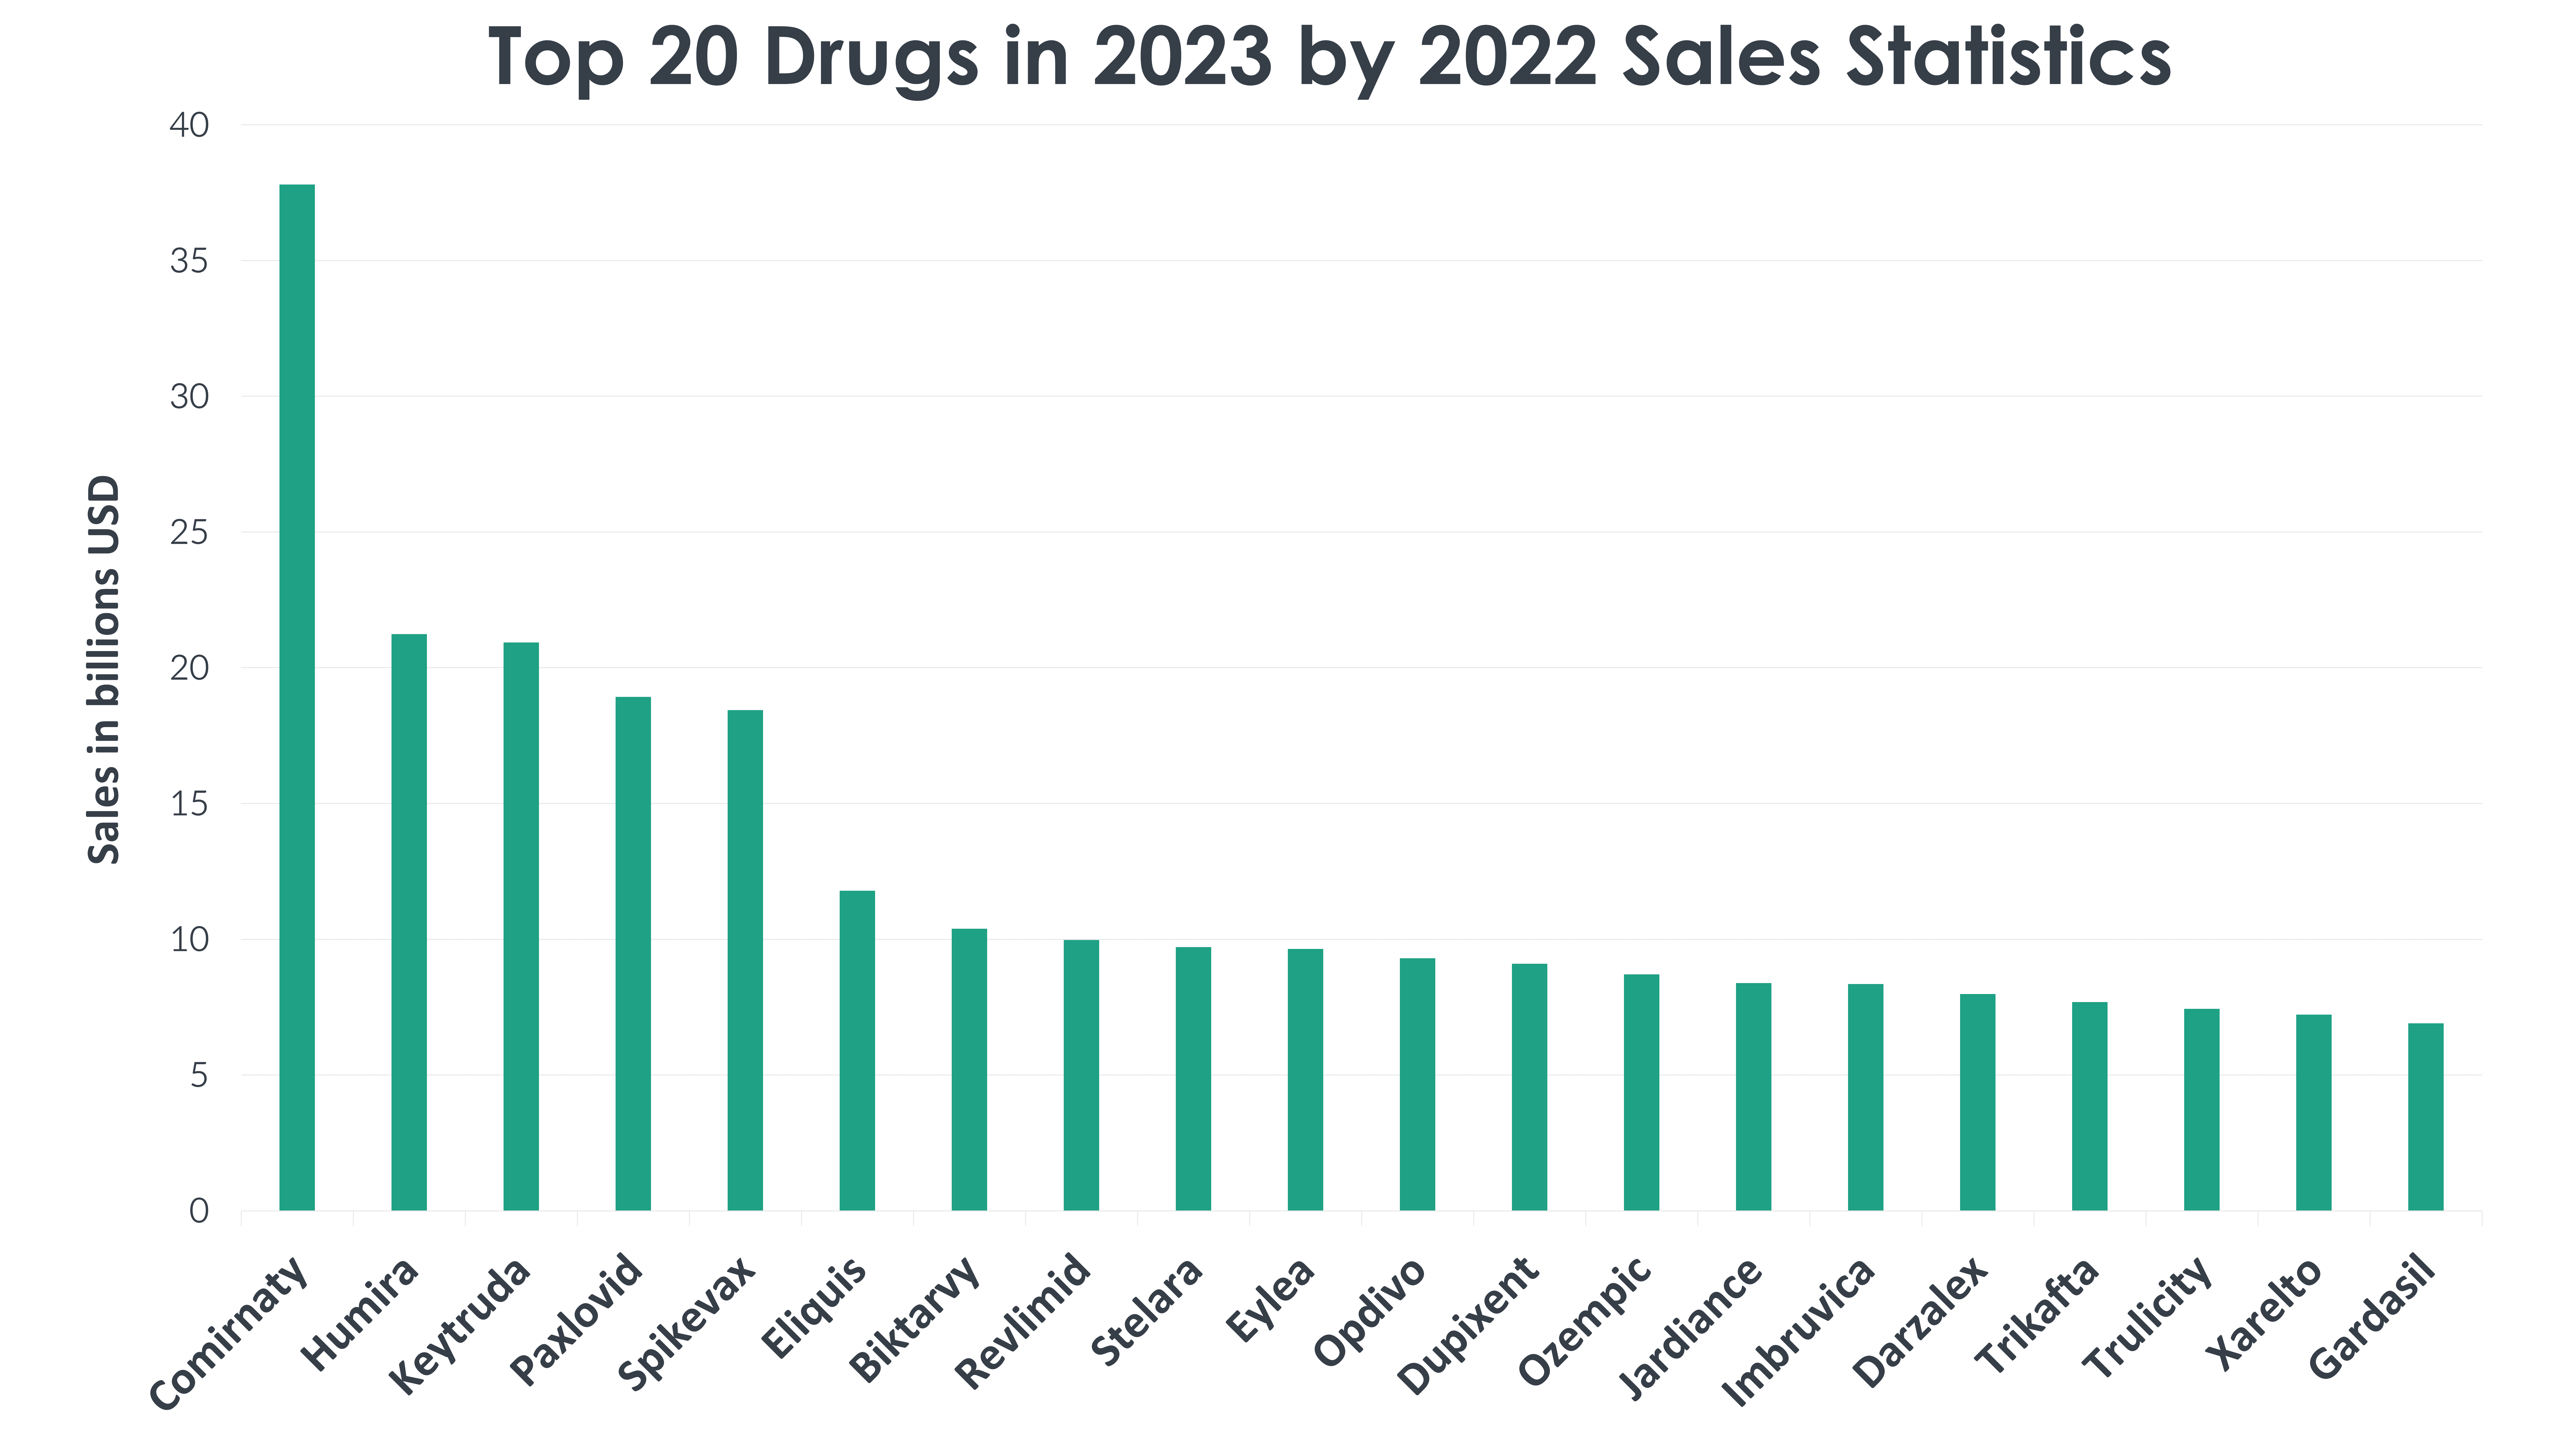 Here are the Top 20 Drugs in 2023 based on 2022’s retail sales data.